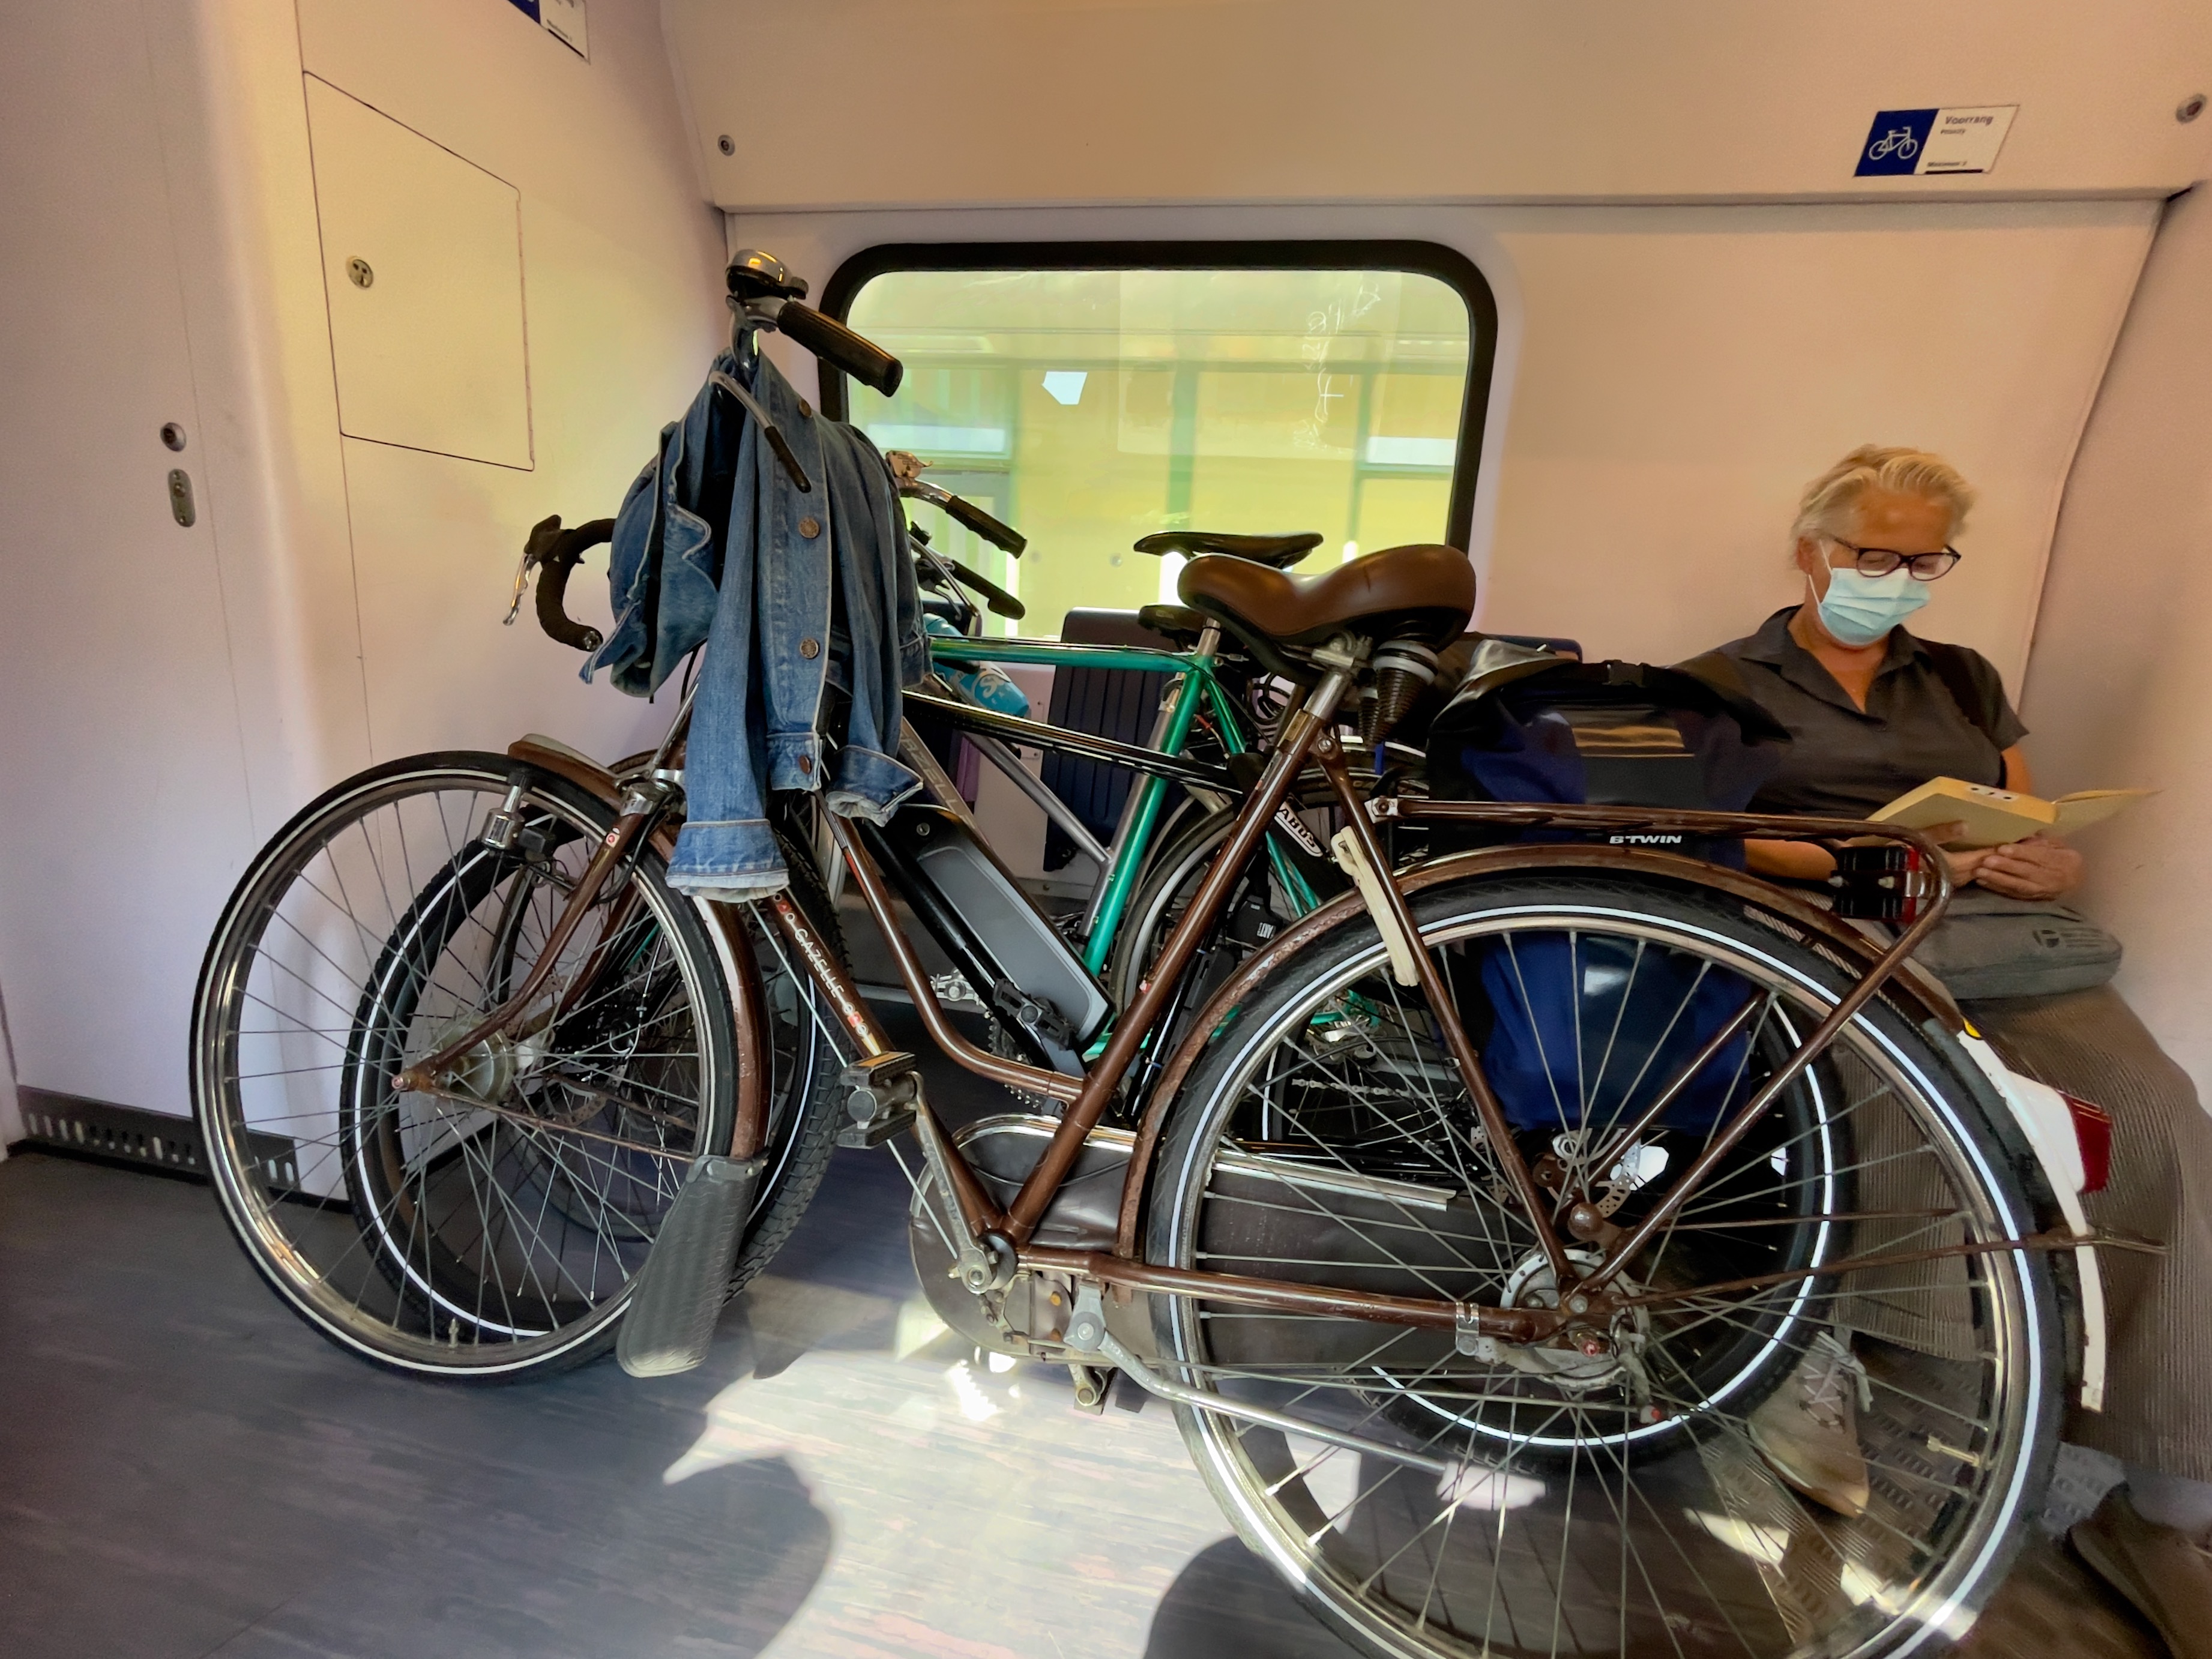 My bike and other bikes being carried in the train